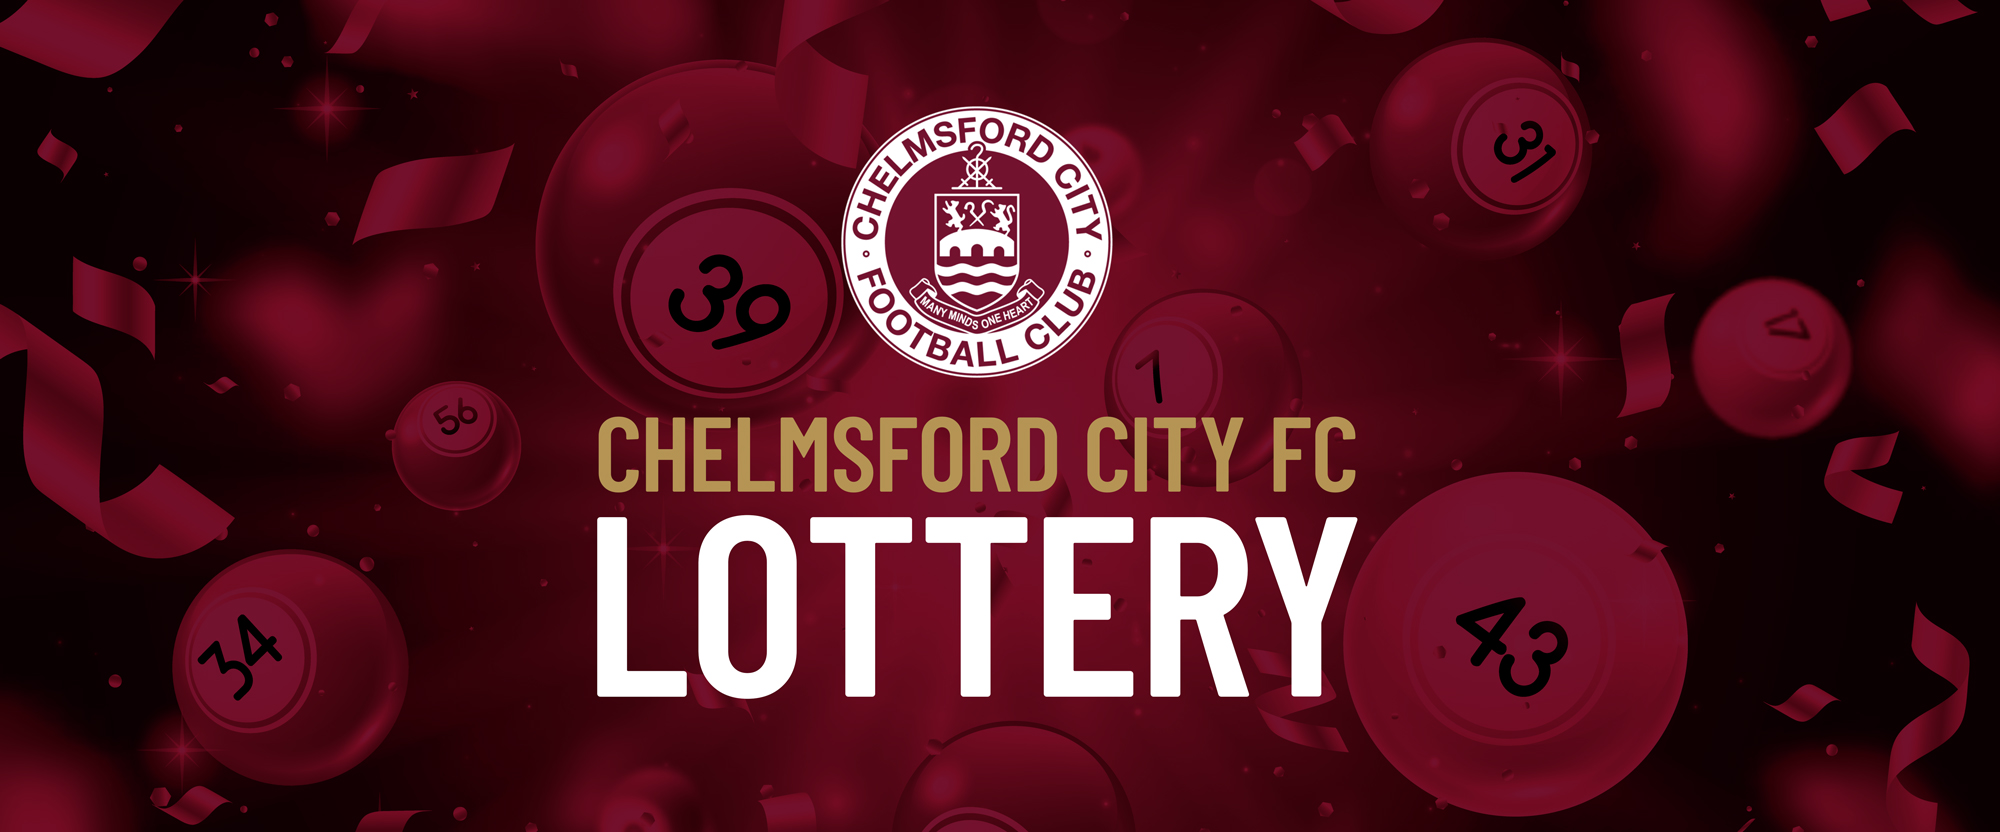 Chelmsford CIty Lottery